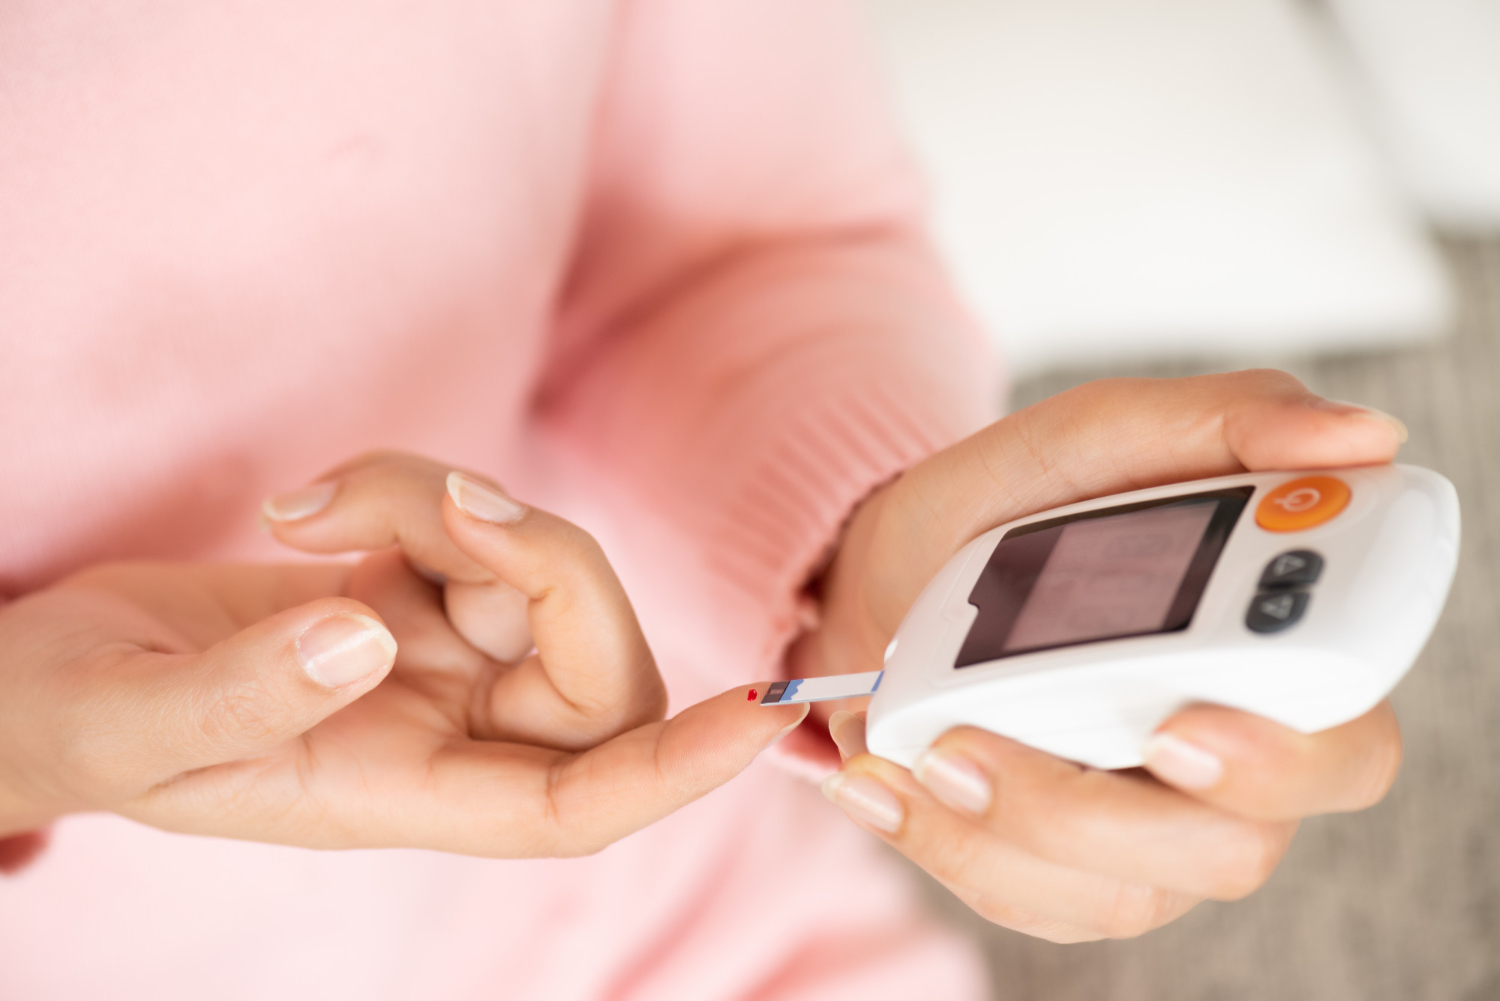 3 Diabetes, high blood pressure and obesity ‒ the creeping threat of lifestyle diseases